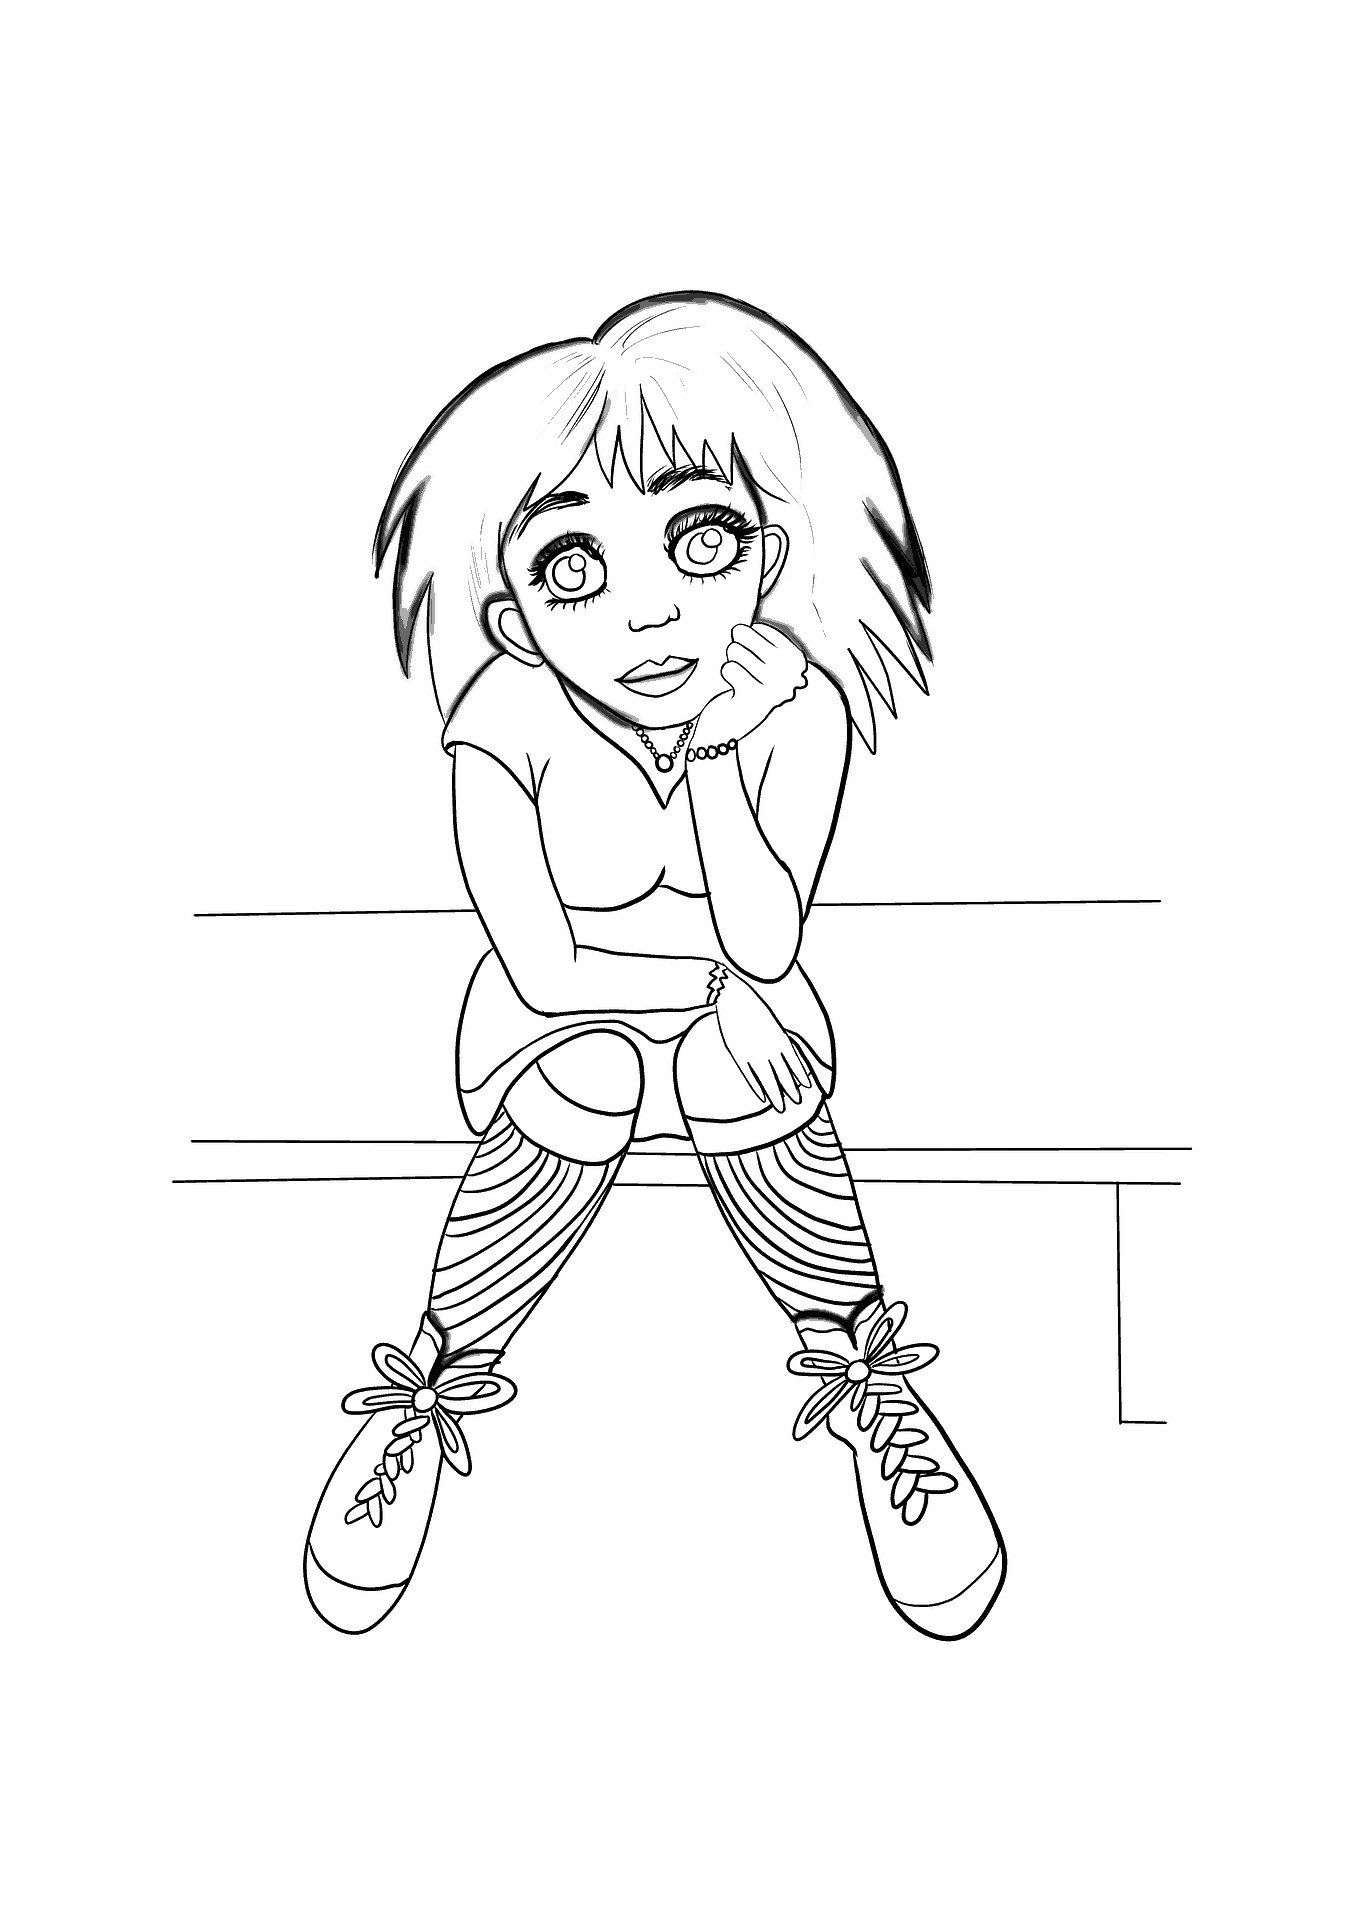 Online Printable Coloring Pages For Girls
 The Best Free Coloring Pages For Girls